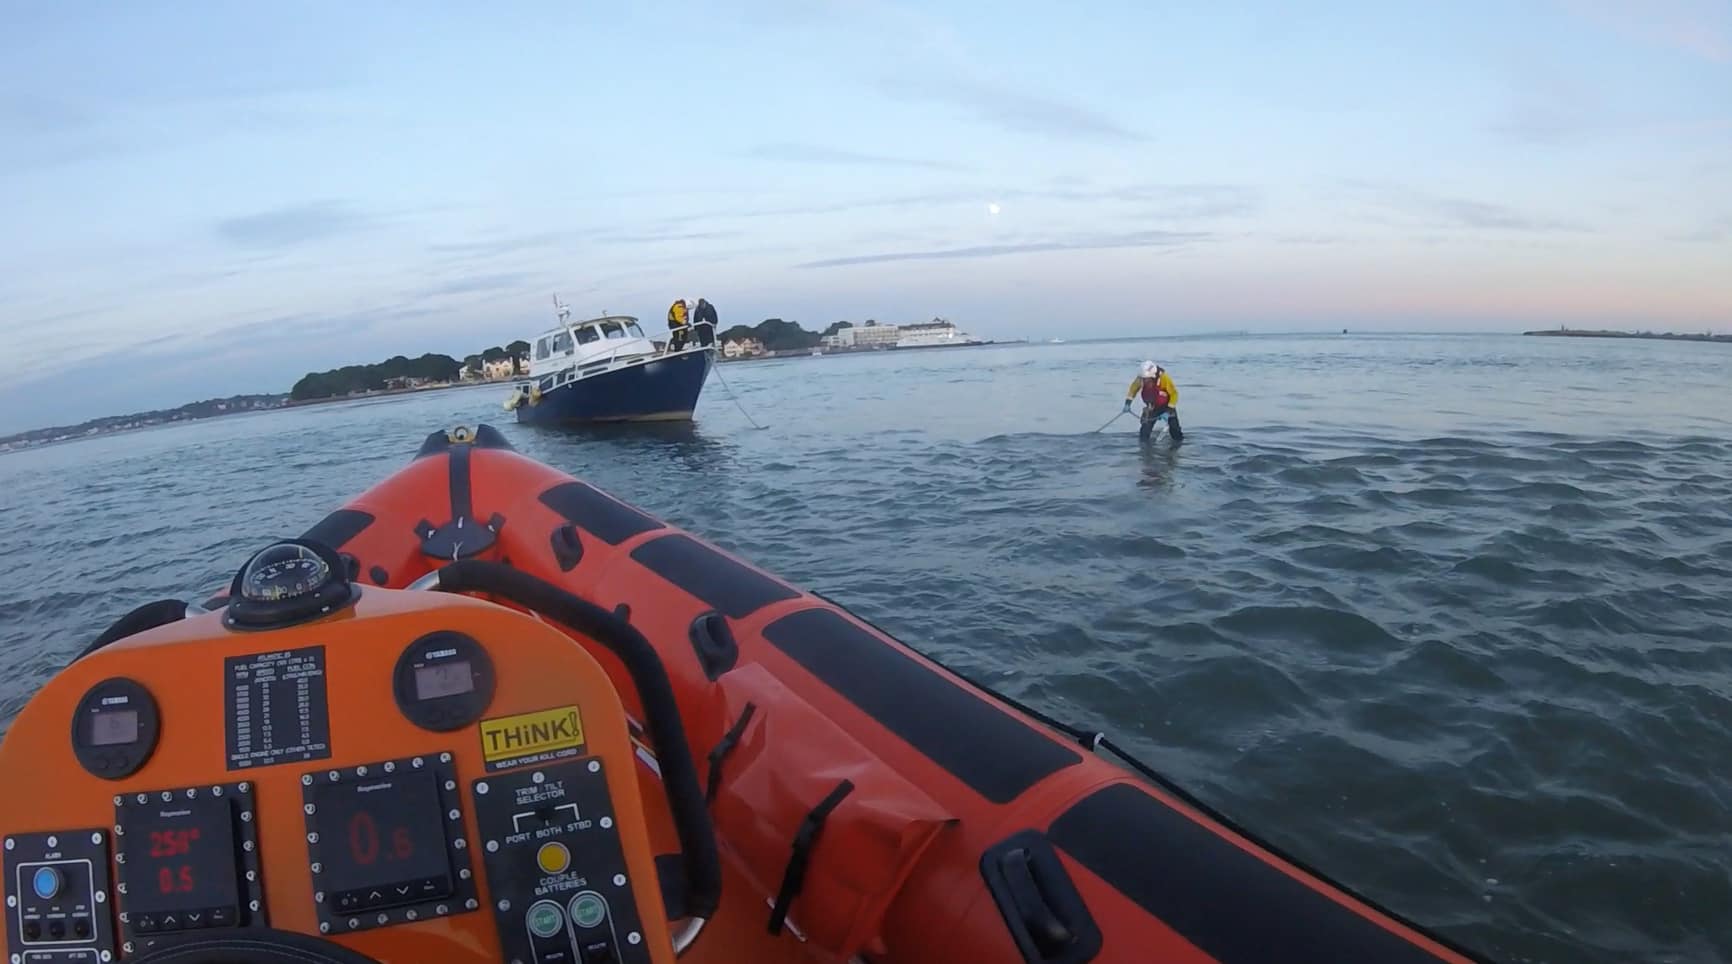 Crew members anchoring the aground boat. Photo: RNLI.